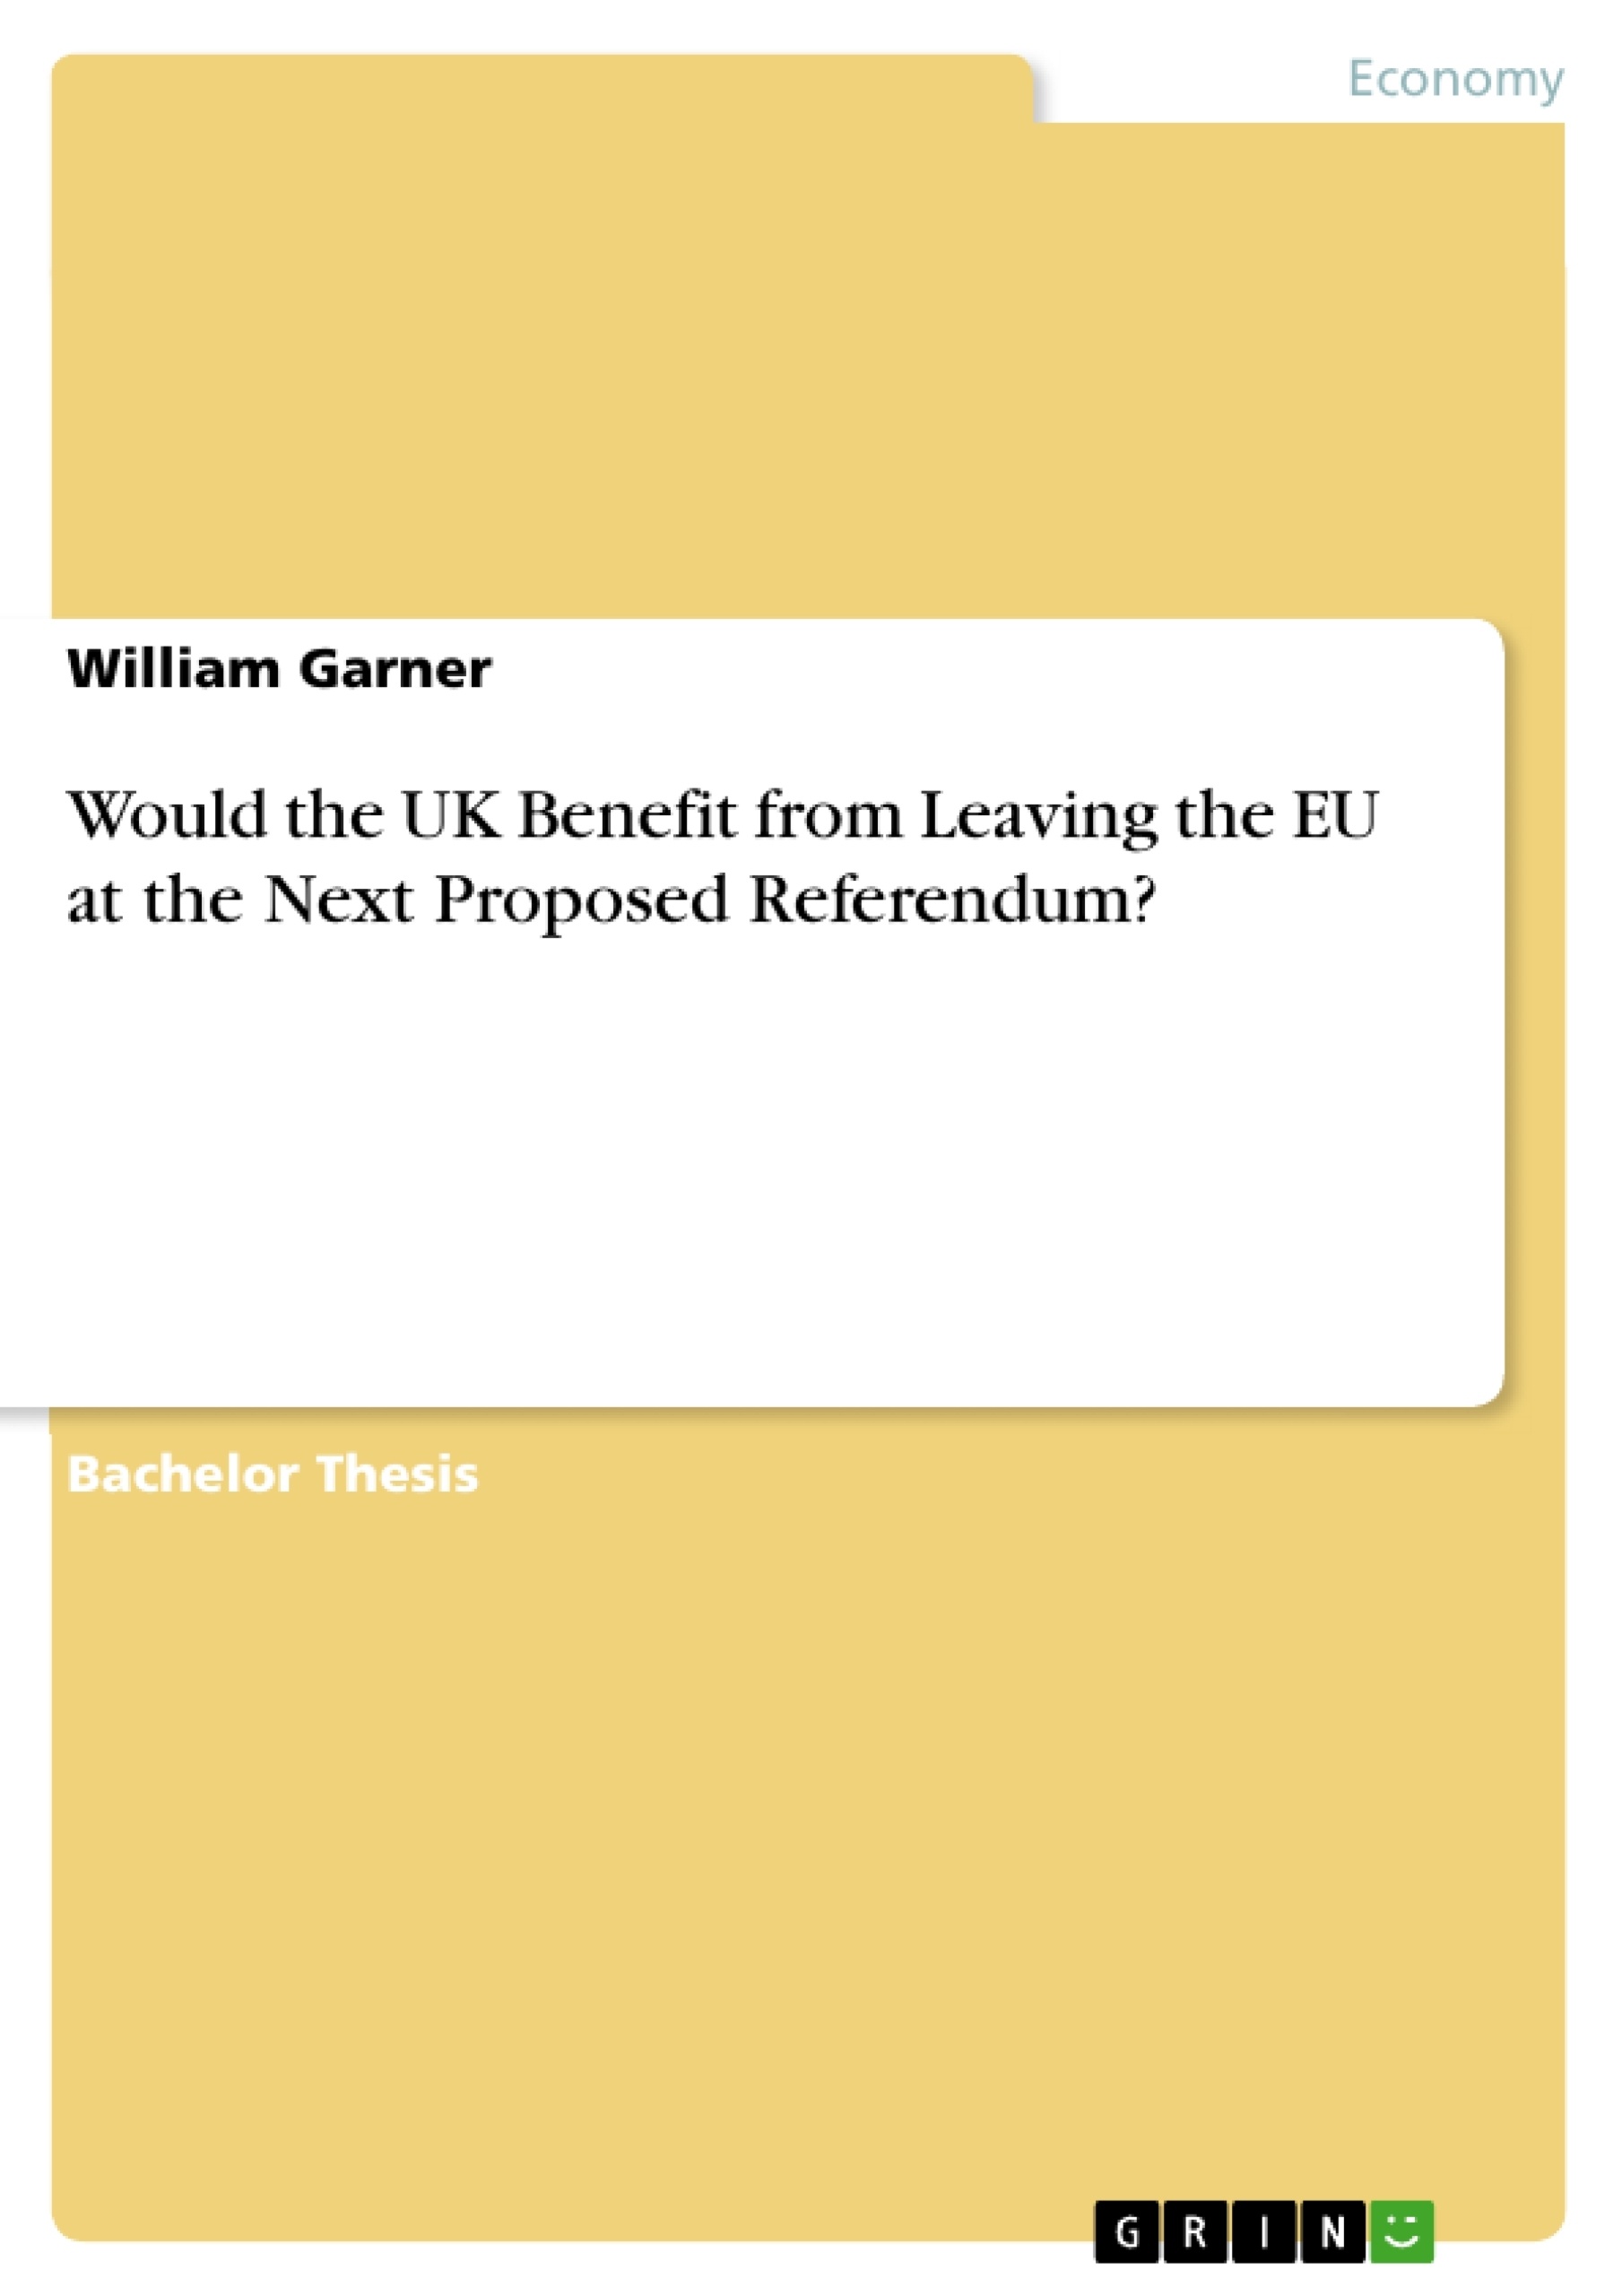 Titre: Would the UK Benefit from Leaving the EU at the Next Proposed Referendum?